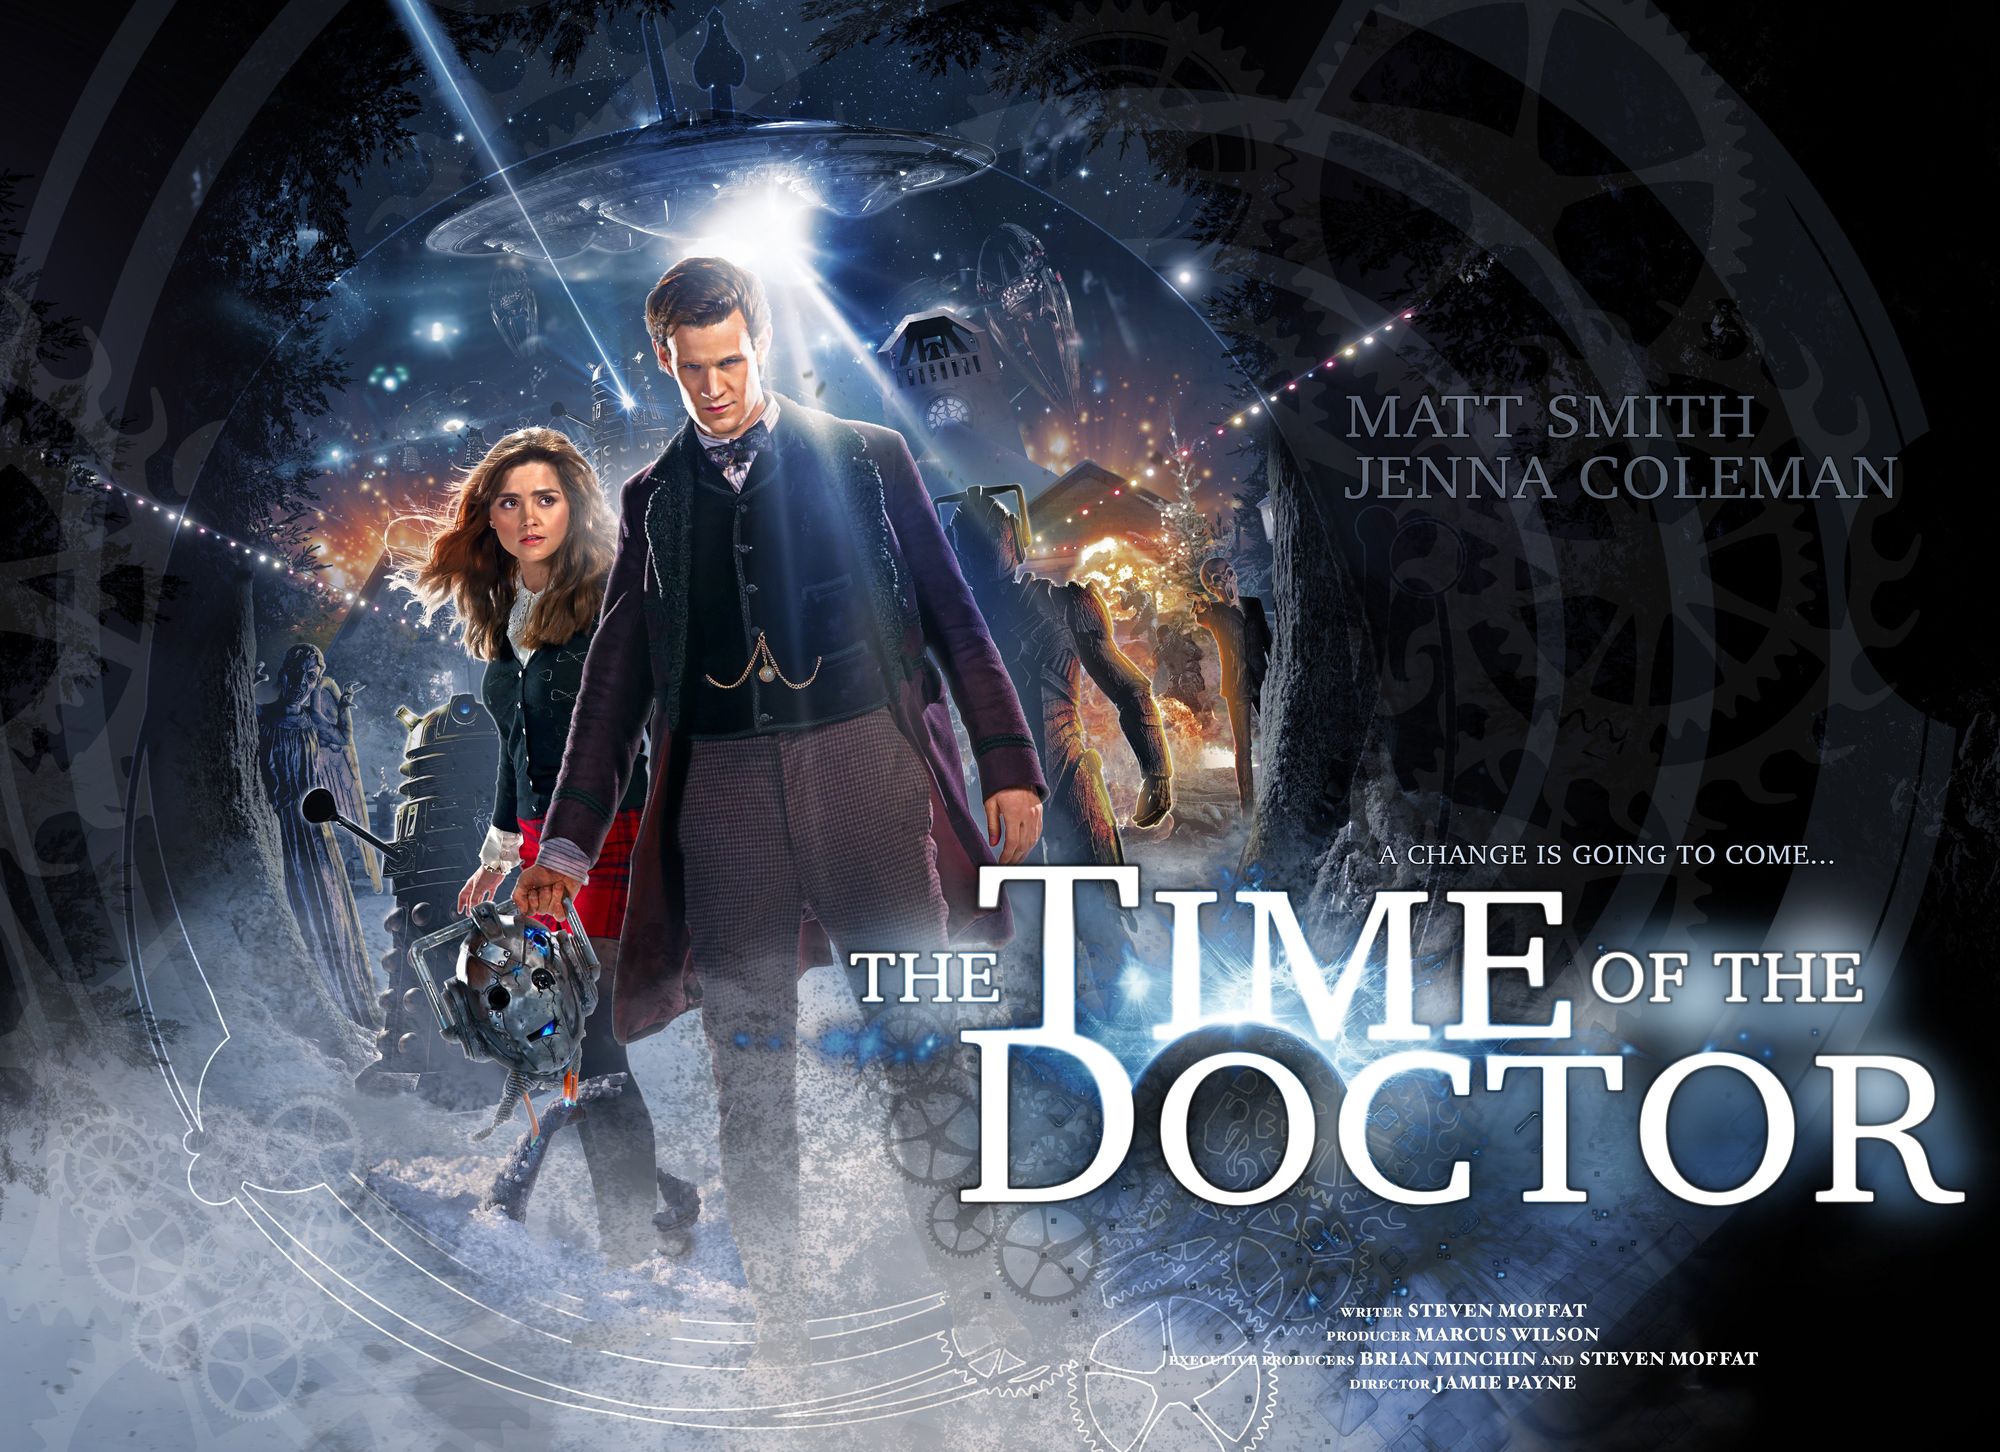 TimeOfTheDoctor-Posters-0002.jpg